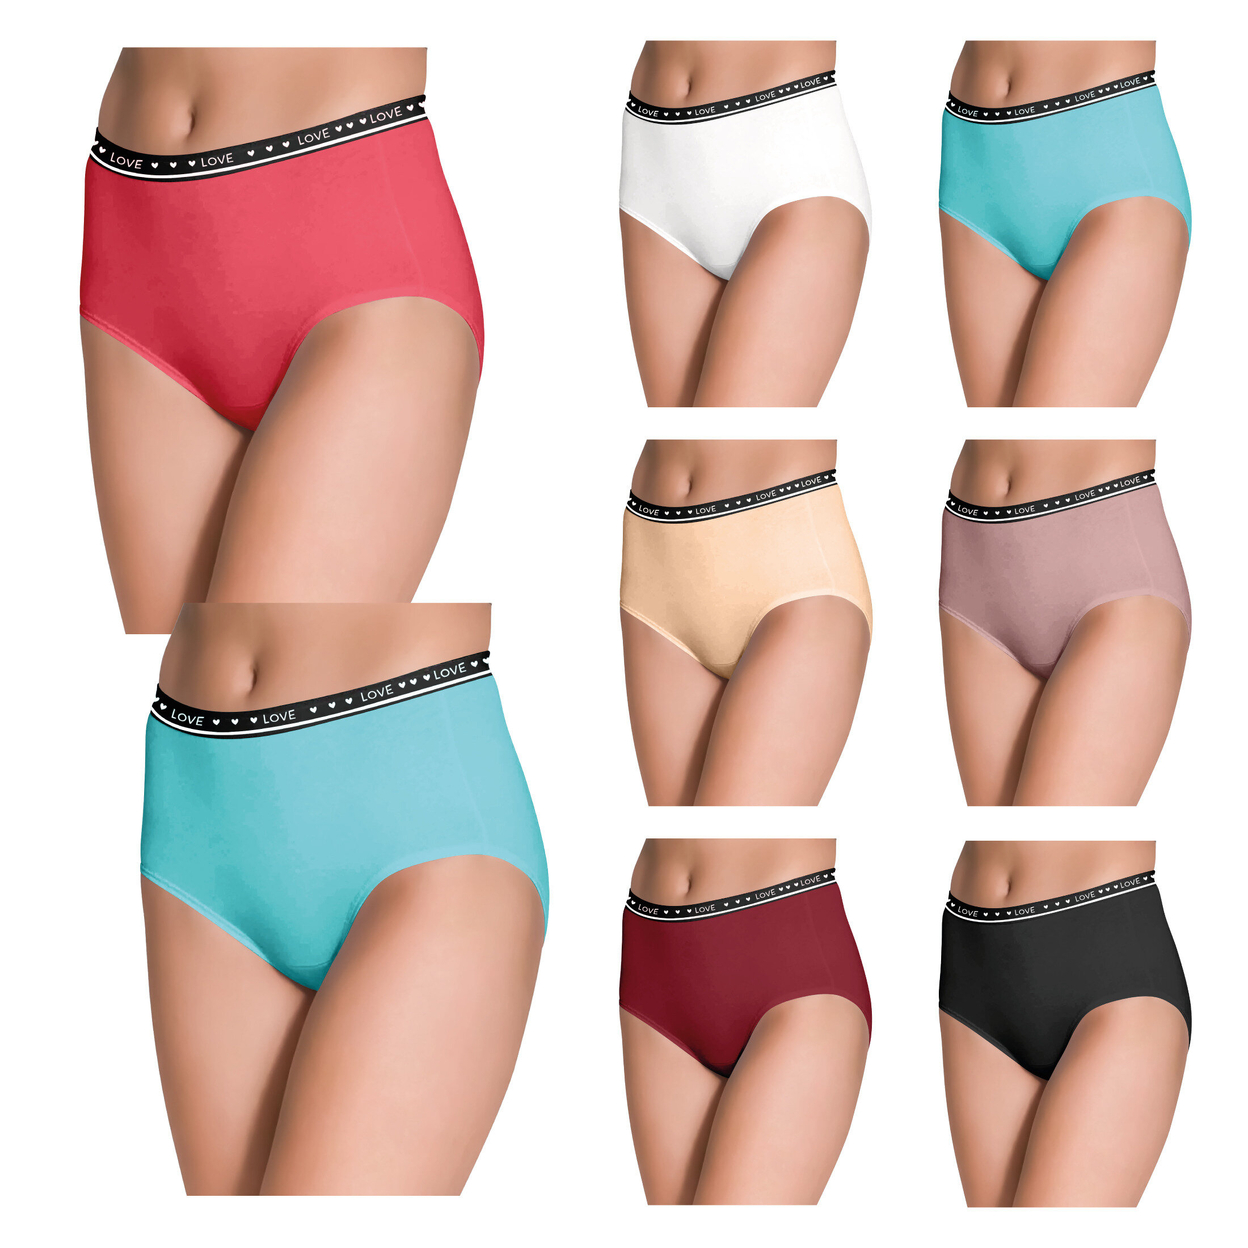 3-Pack: Women's Ultra Soft Moisture Wicking Panties Cotton Perfect Fit Underwear (Plus Sizes Available) - X-large